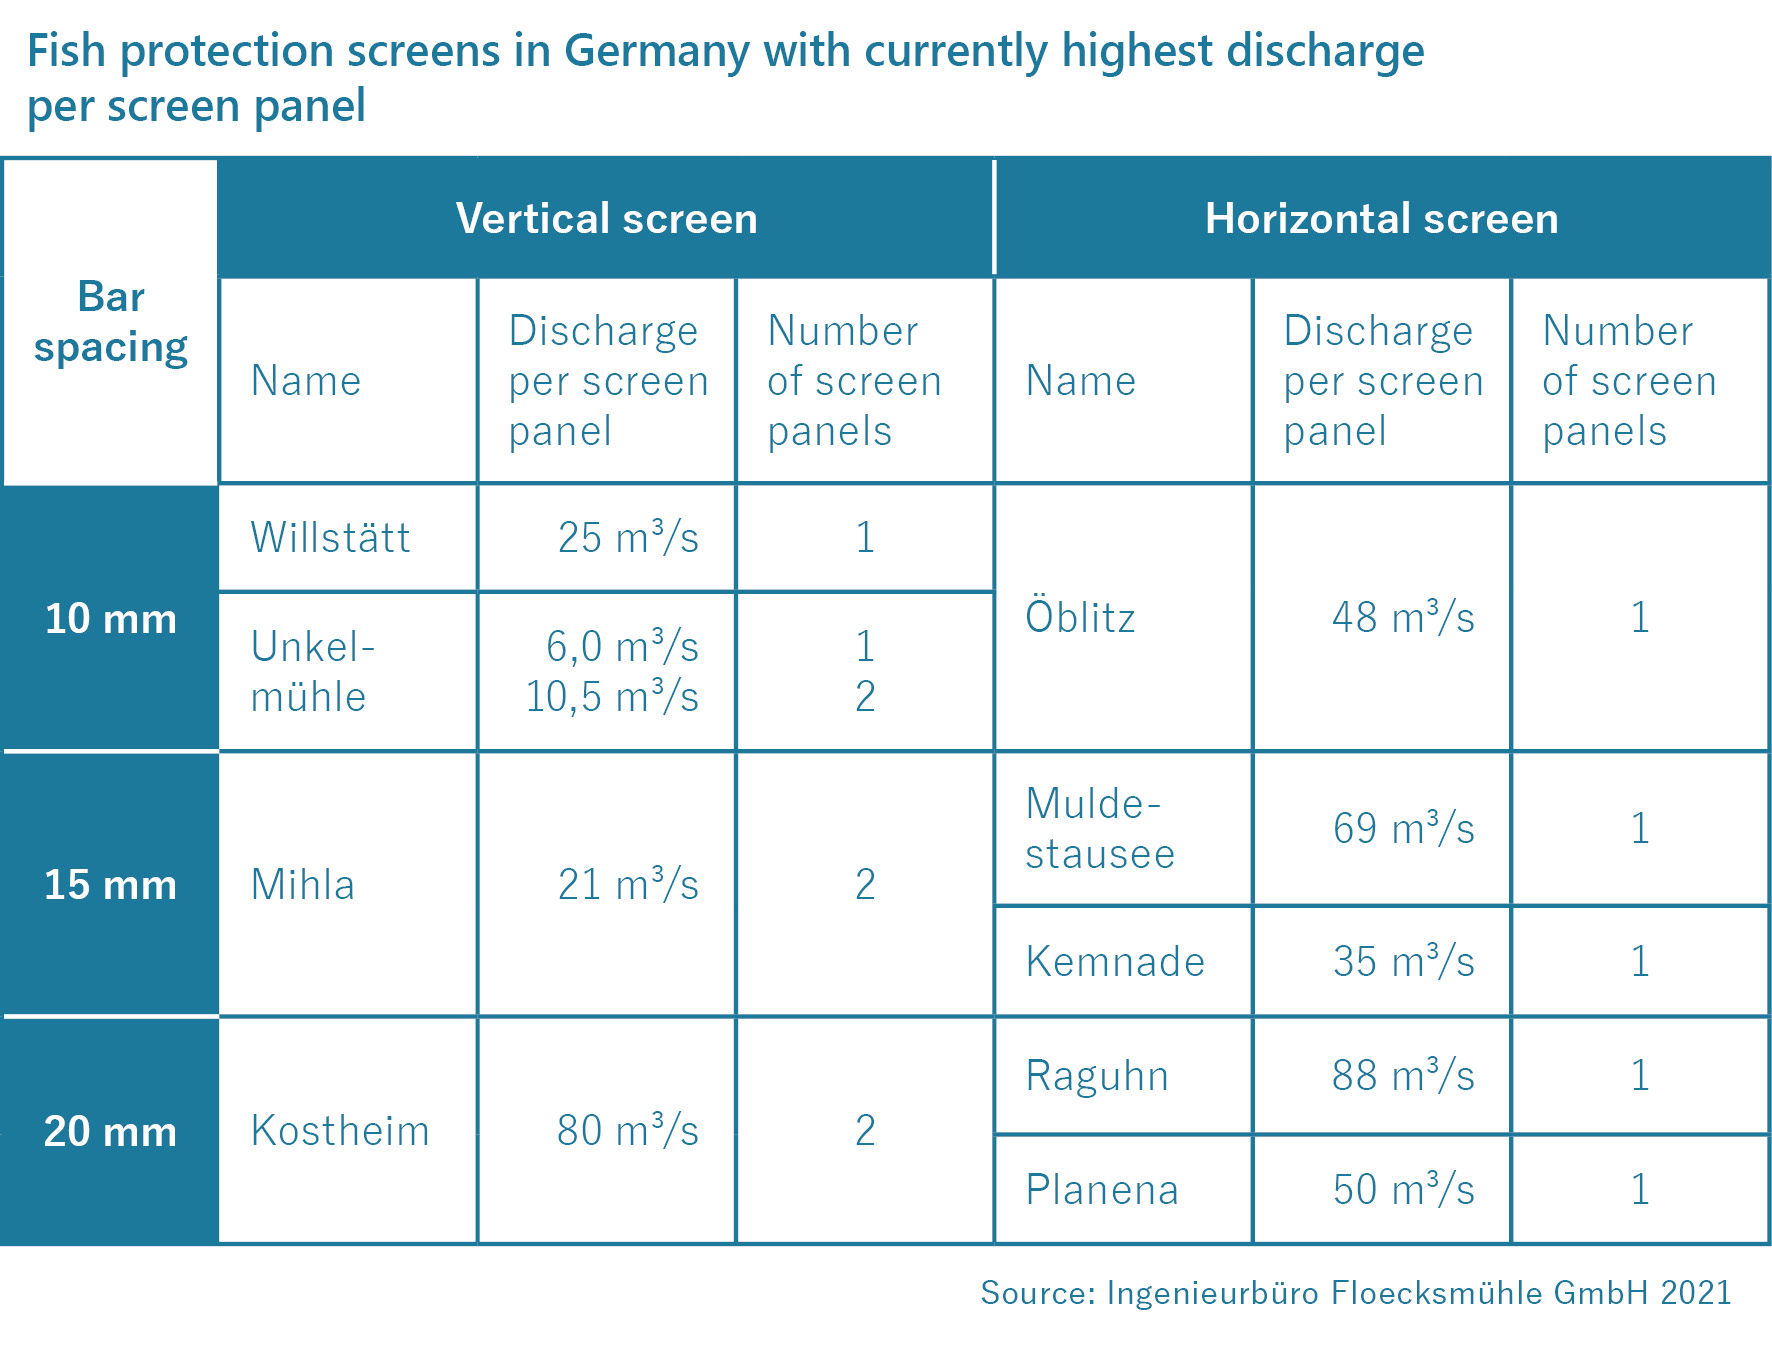 Fish protection screens in Germany with currently highest discharge per screen panel